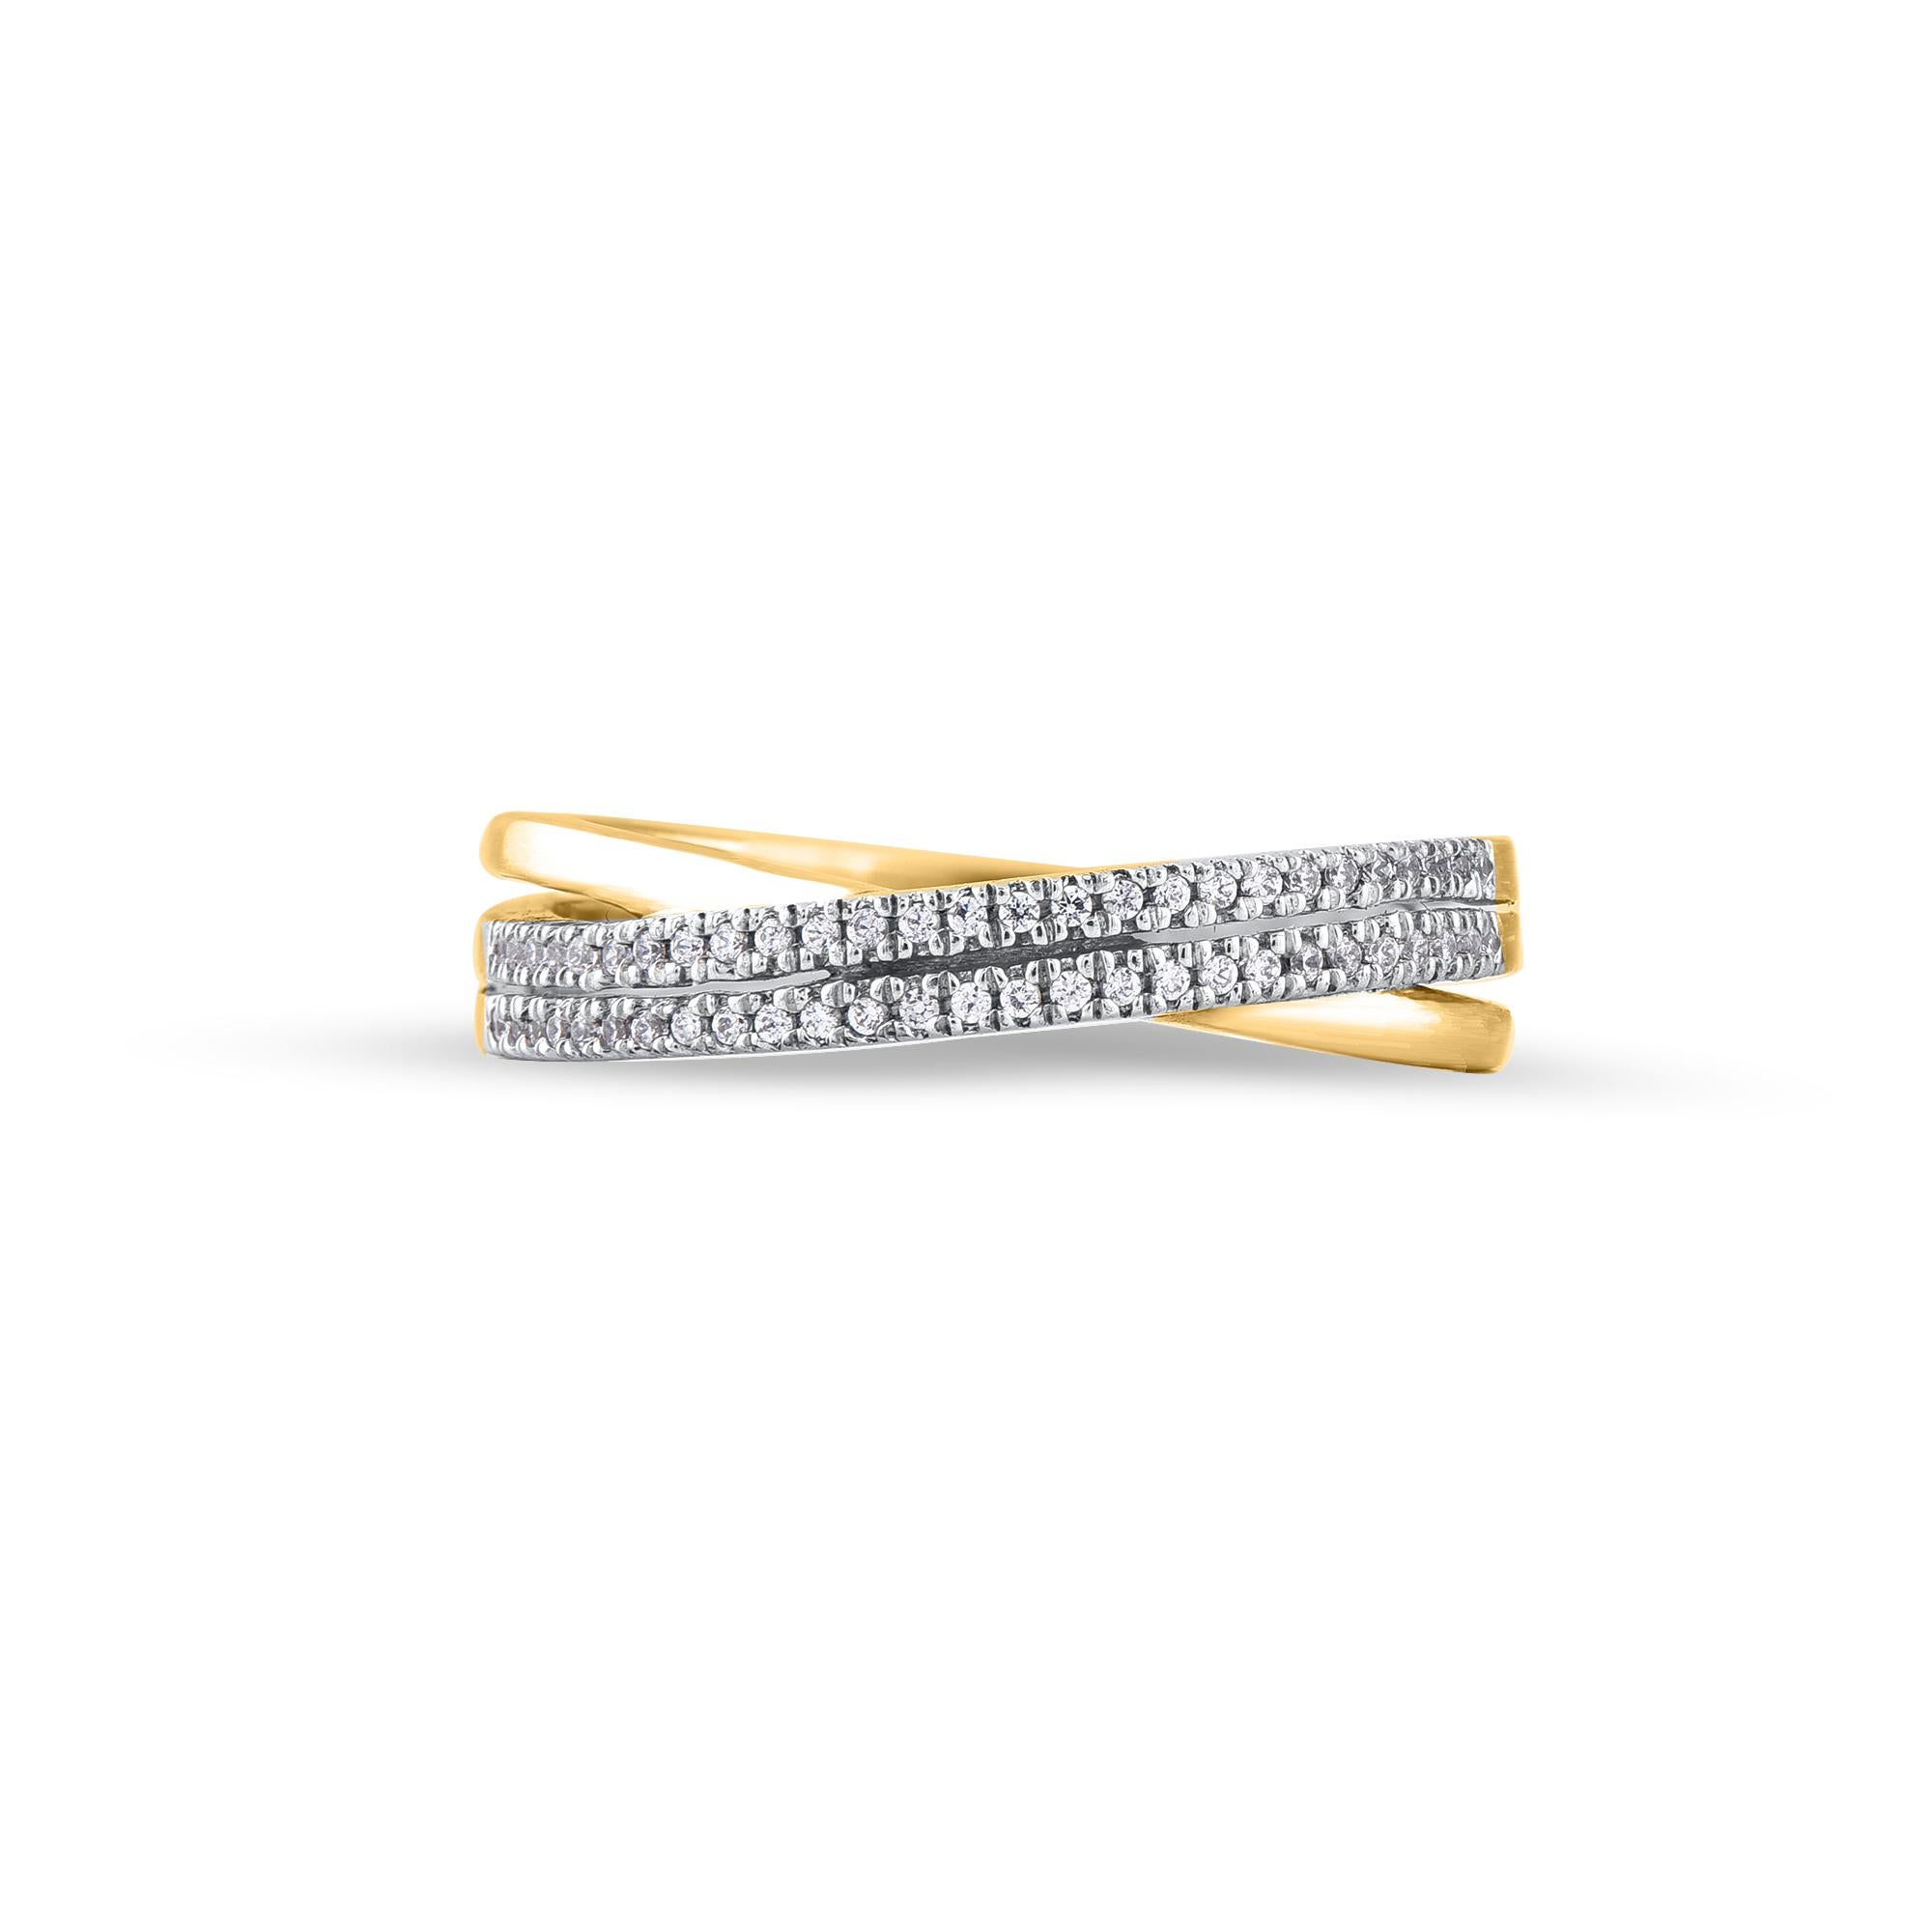 This crossover ring is expertly crafted in 14 Karat Yellow Gold and features a sparkling 54 single cut round diamonds beautifully set in prong setting. The total diamond weight is 0.15 Carat. The diamonds are graded as H-I color and I2 clarity.